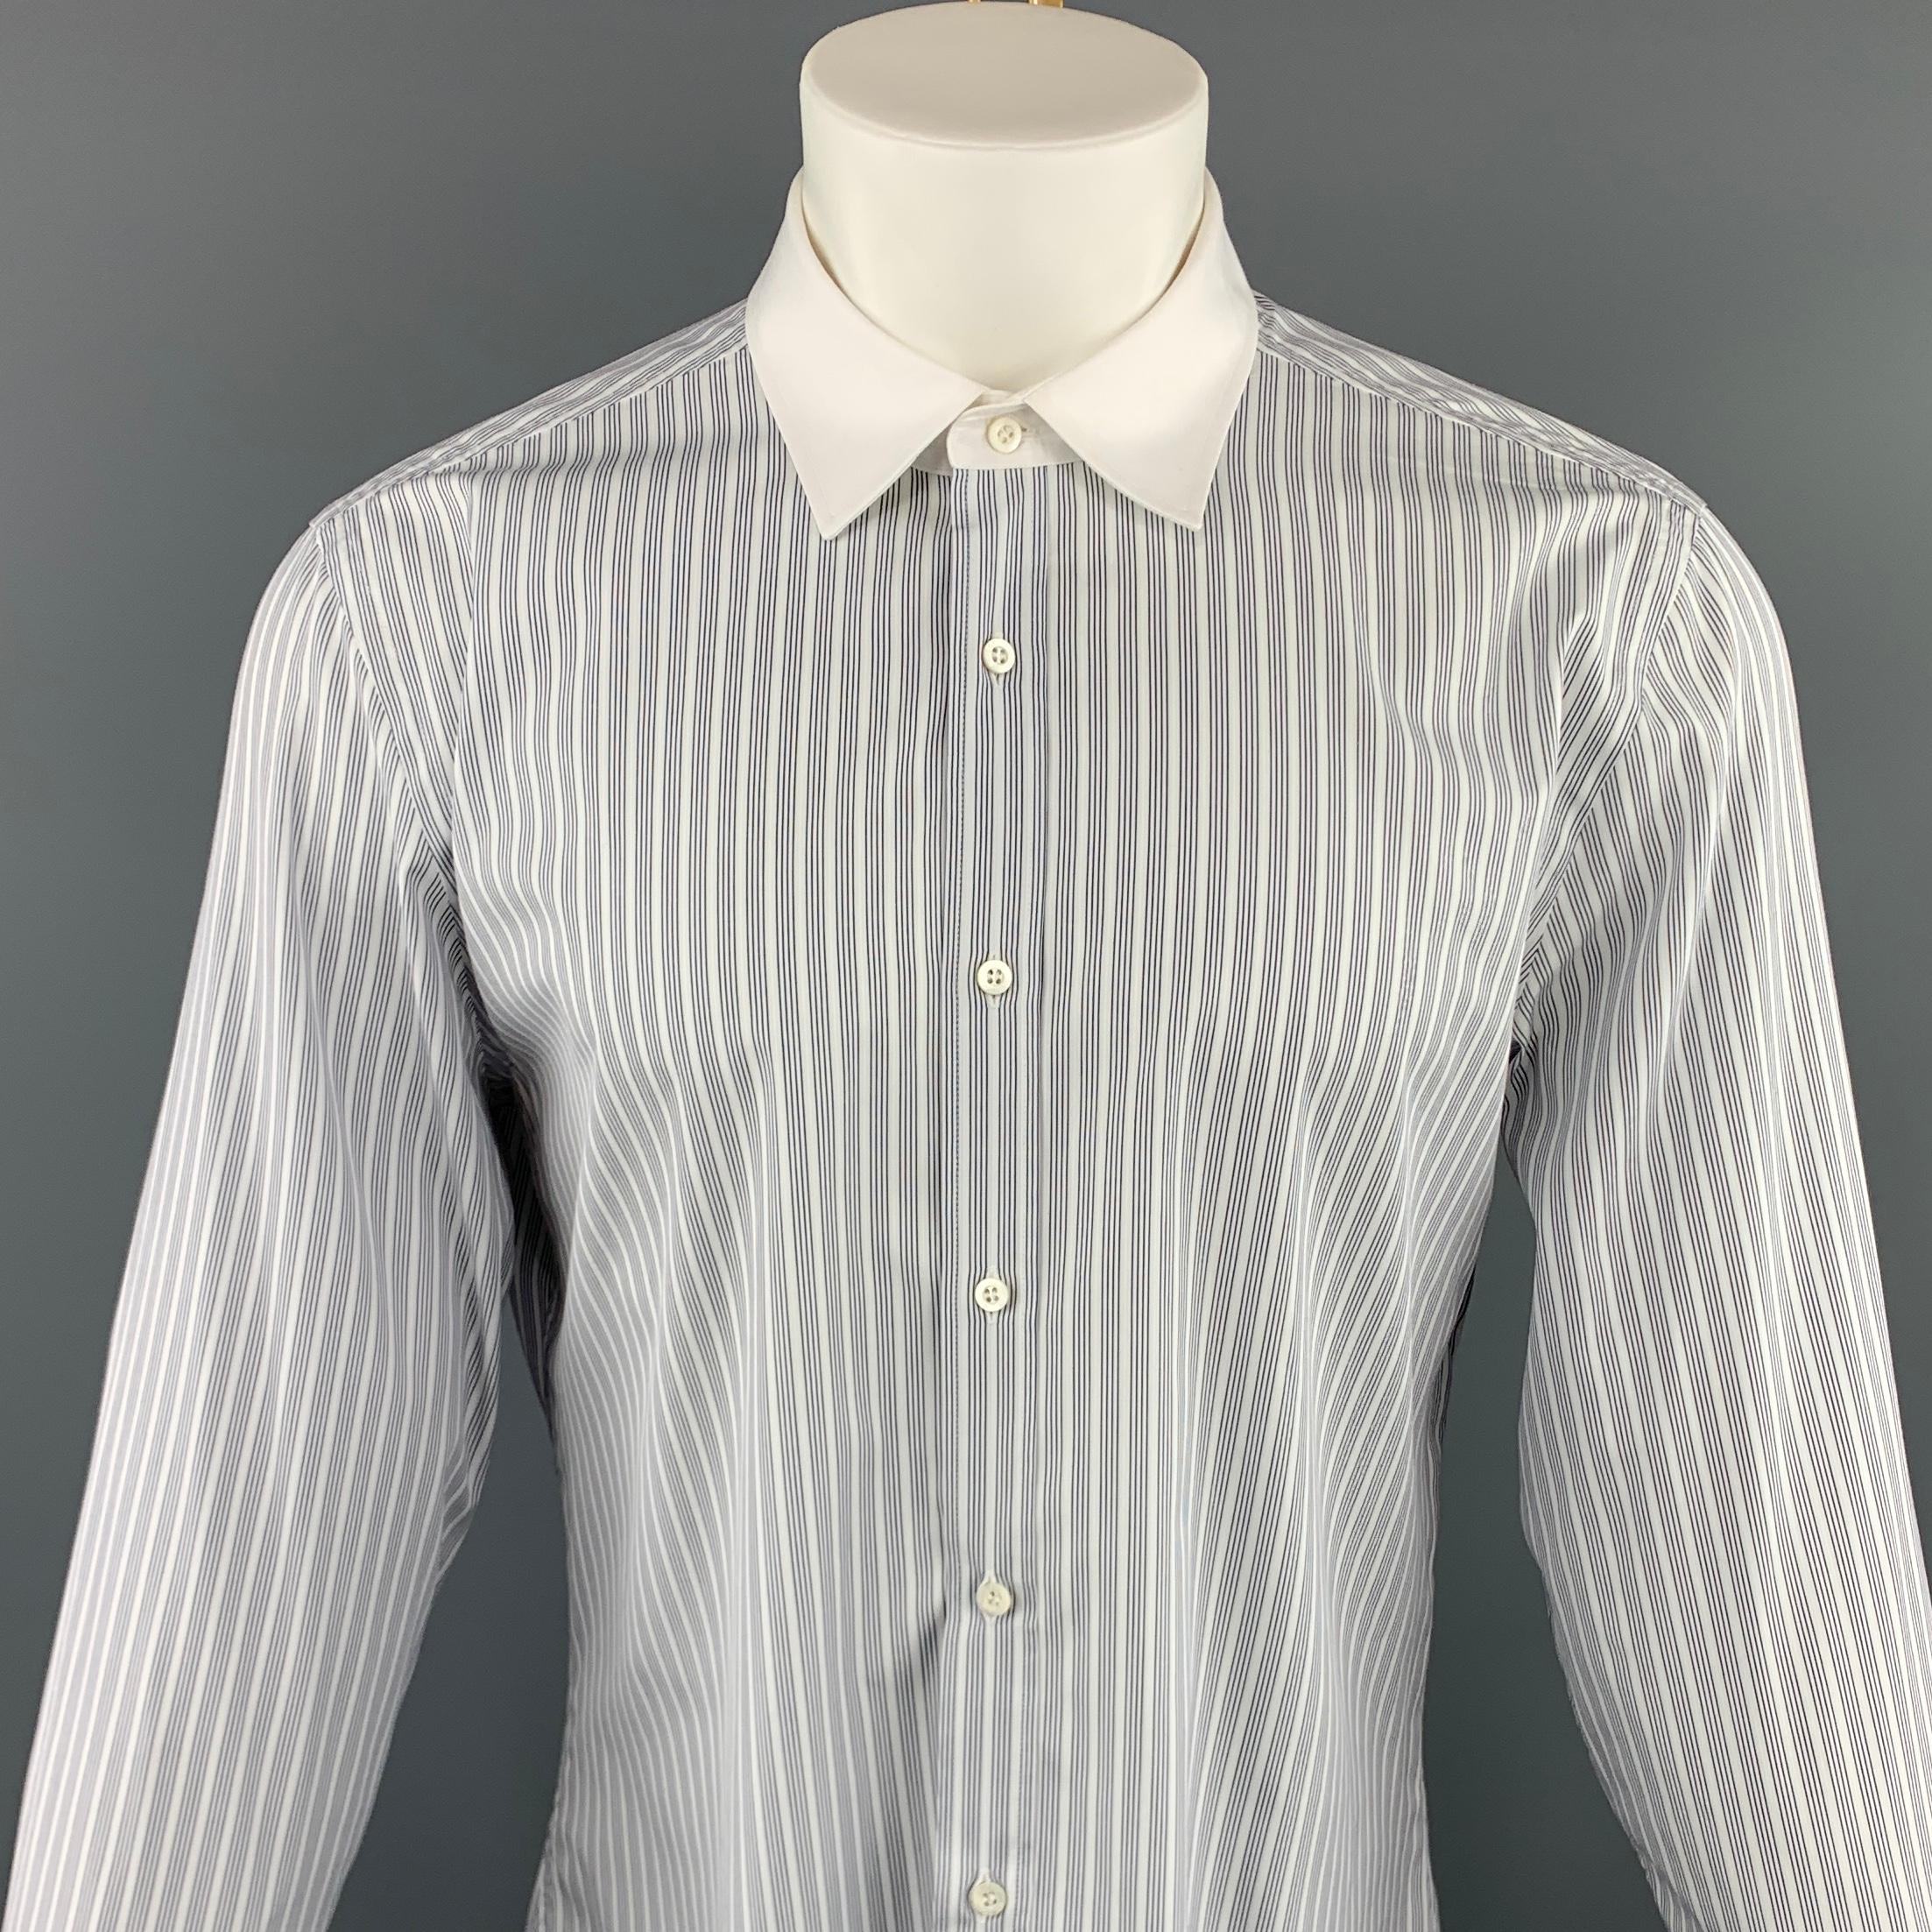 GUCCI long sleeve shirt comes in a white and black striped cotton featuring a button up style and a white spread collar. Made in Italy.
 
Excellent Pre-Owned Condition.
Marked: 44
 
Measurements:
 
Shoulder:18 in.
Chest: 47 in.
Sleeve: 27.5